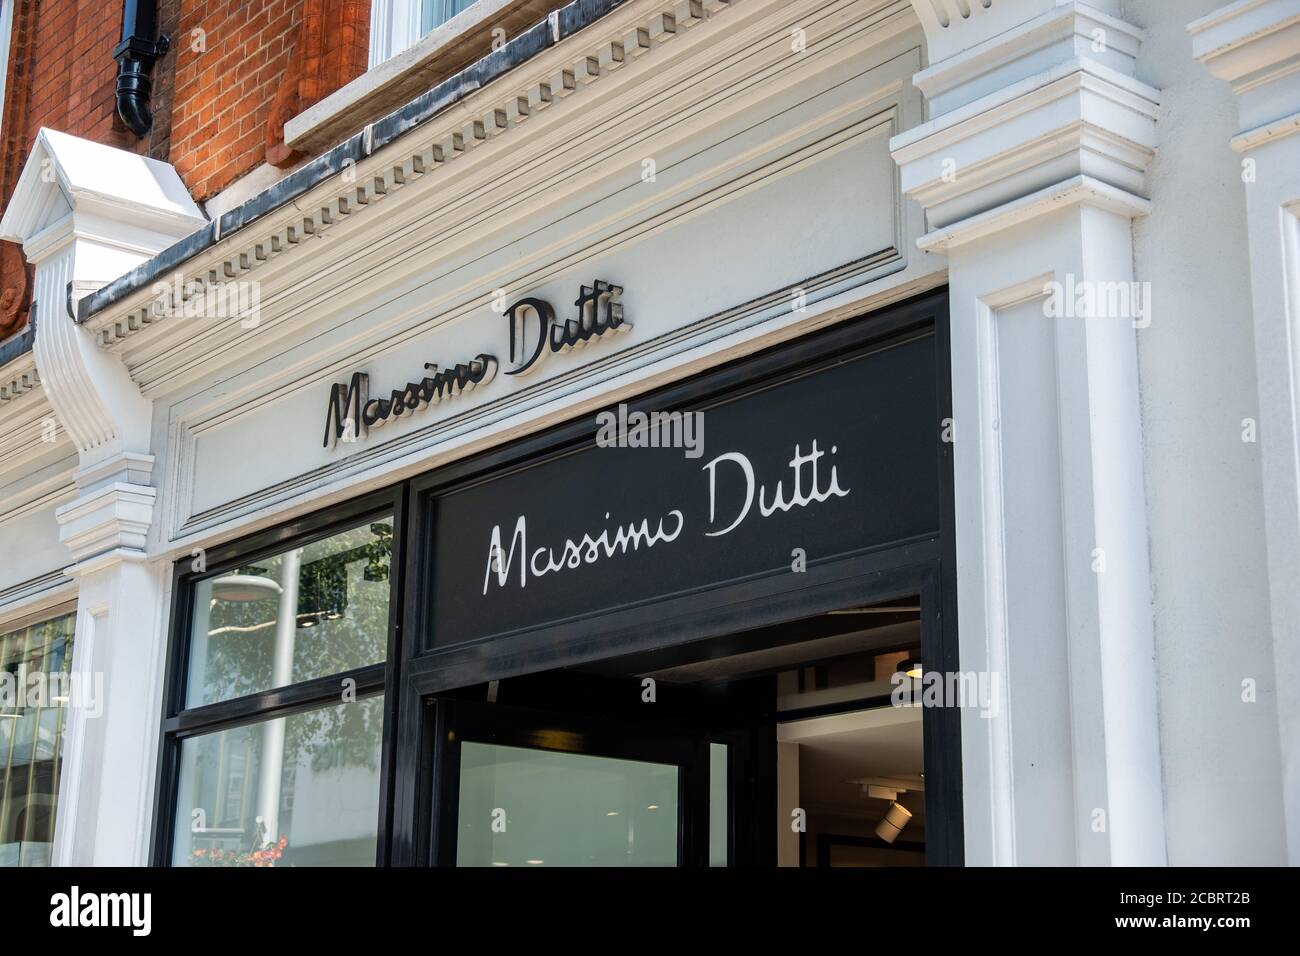 London- Massimo Dutti retail store signage in London's West End Stock Photo  - Alamy